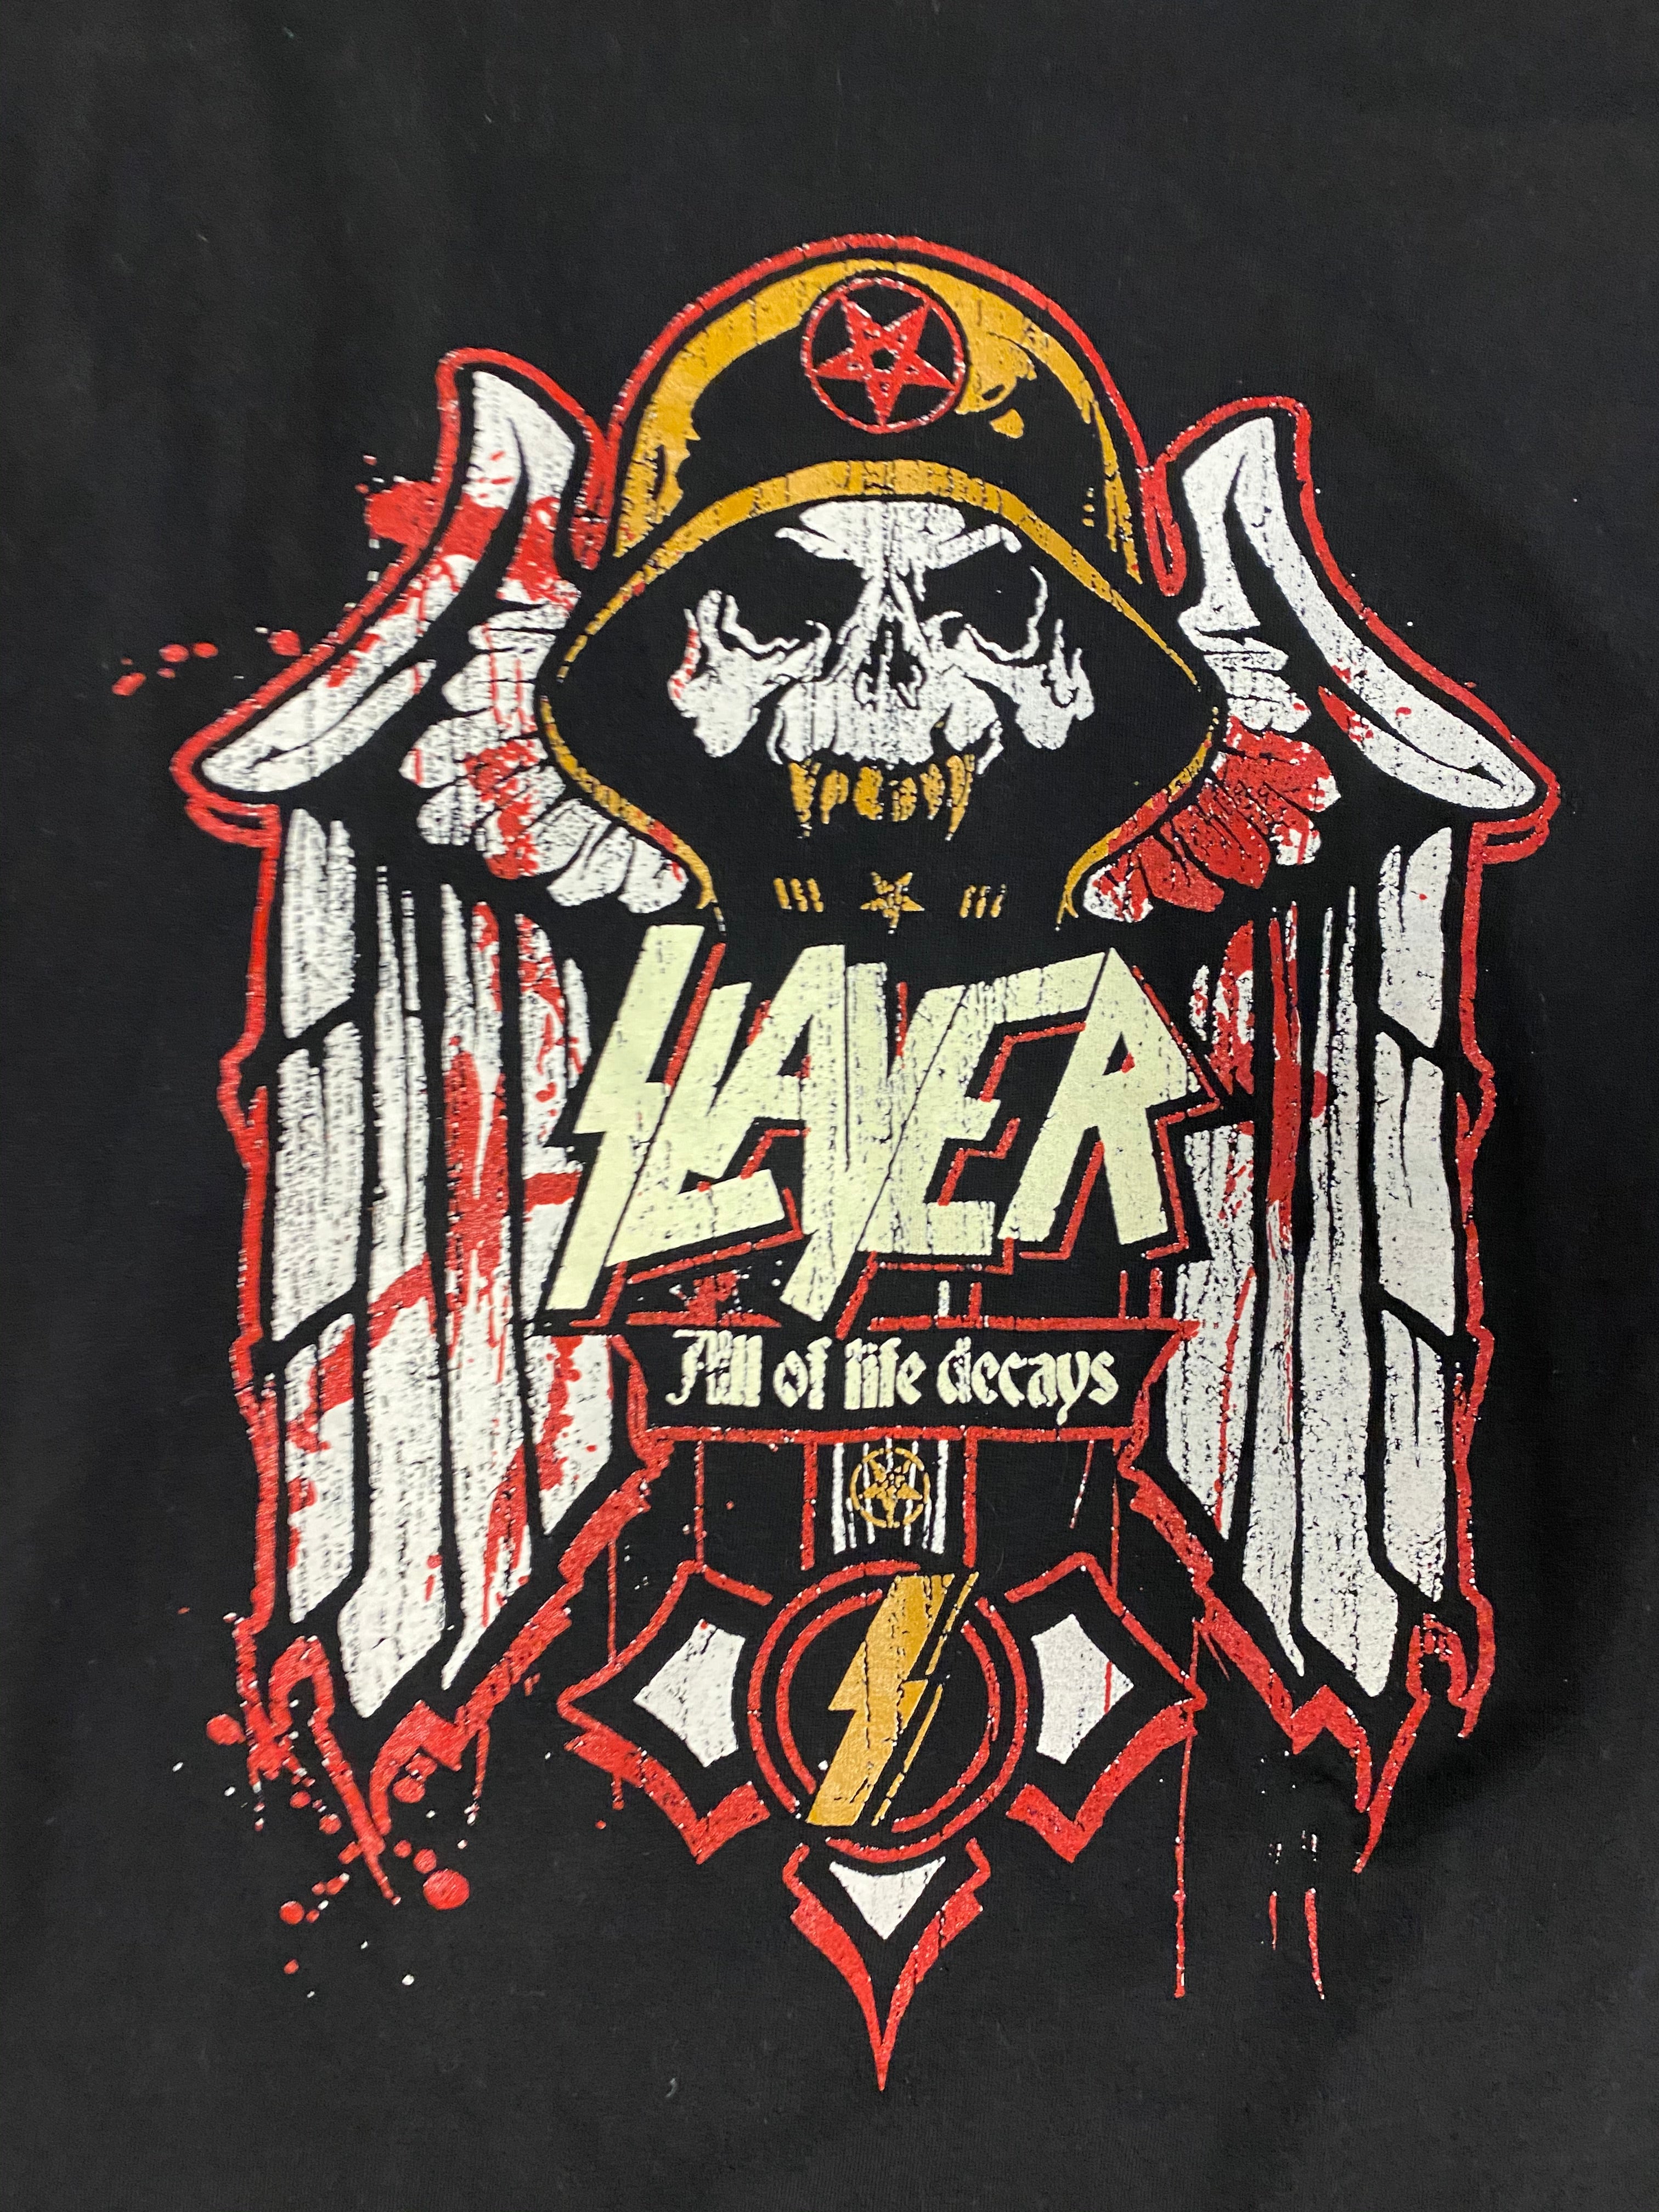 All Style Slayer all of life decays - Black